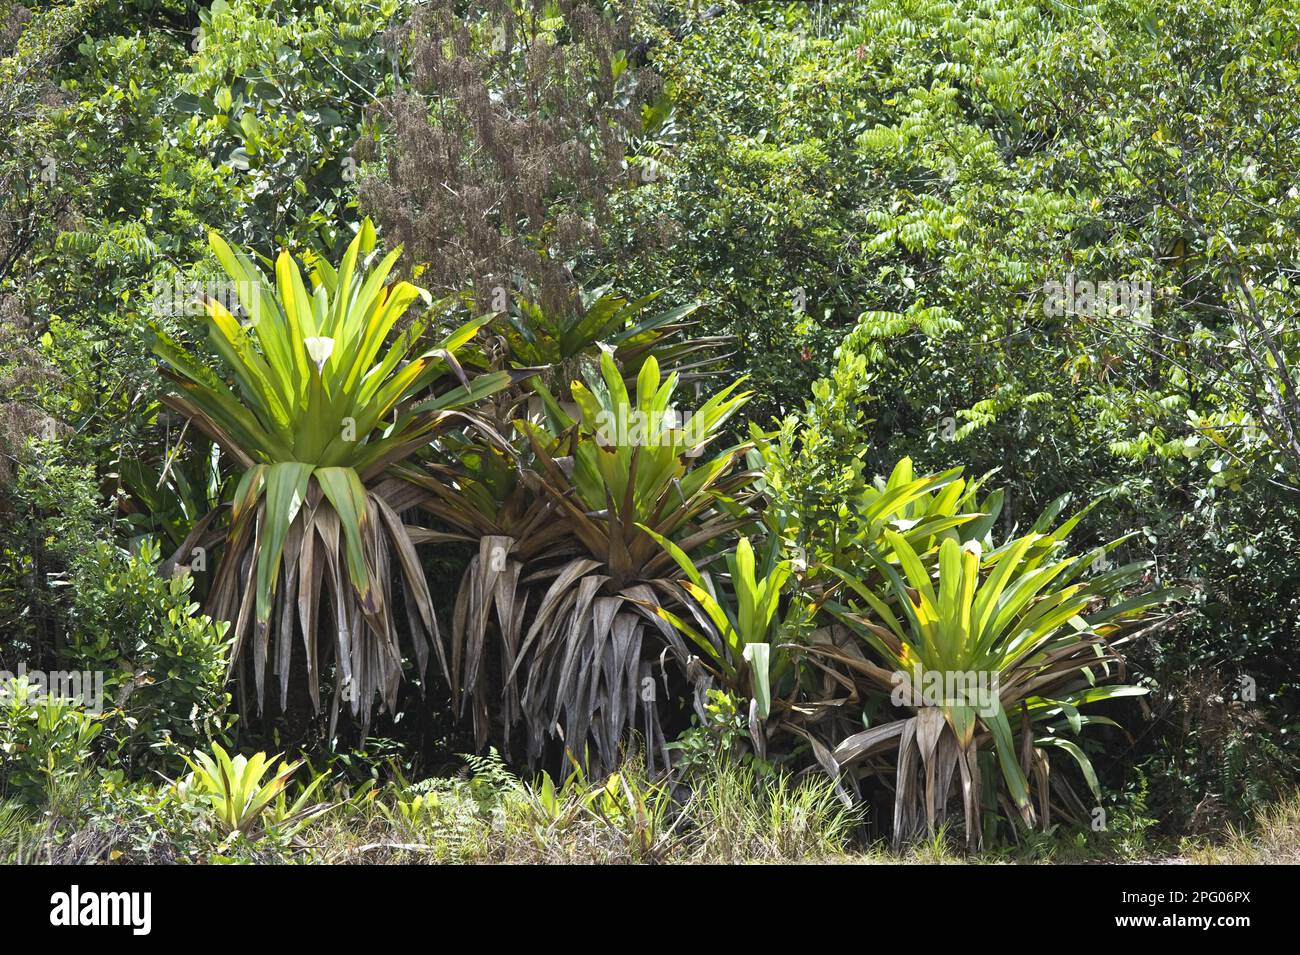 Giant armoured bromeliad (Brocchinia micrantha) growing in tropical forest, Kaieteur N. P. Guayana Shield, Guyana Stock Photo